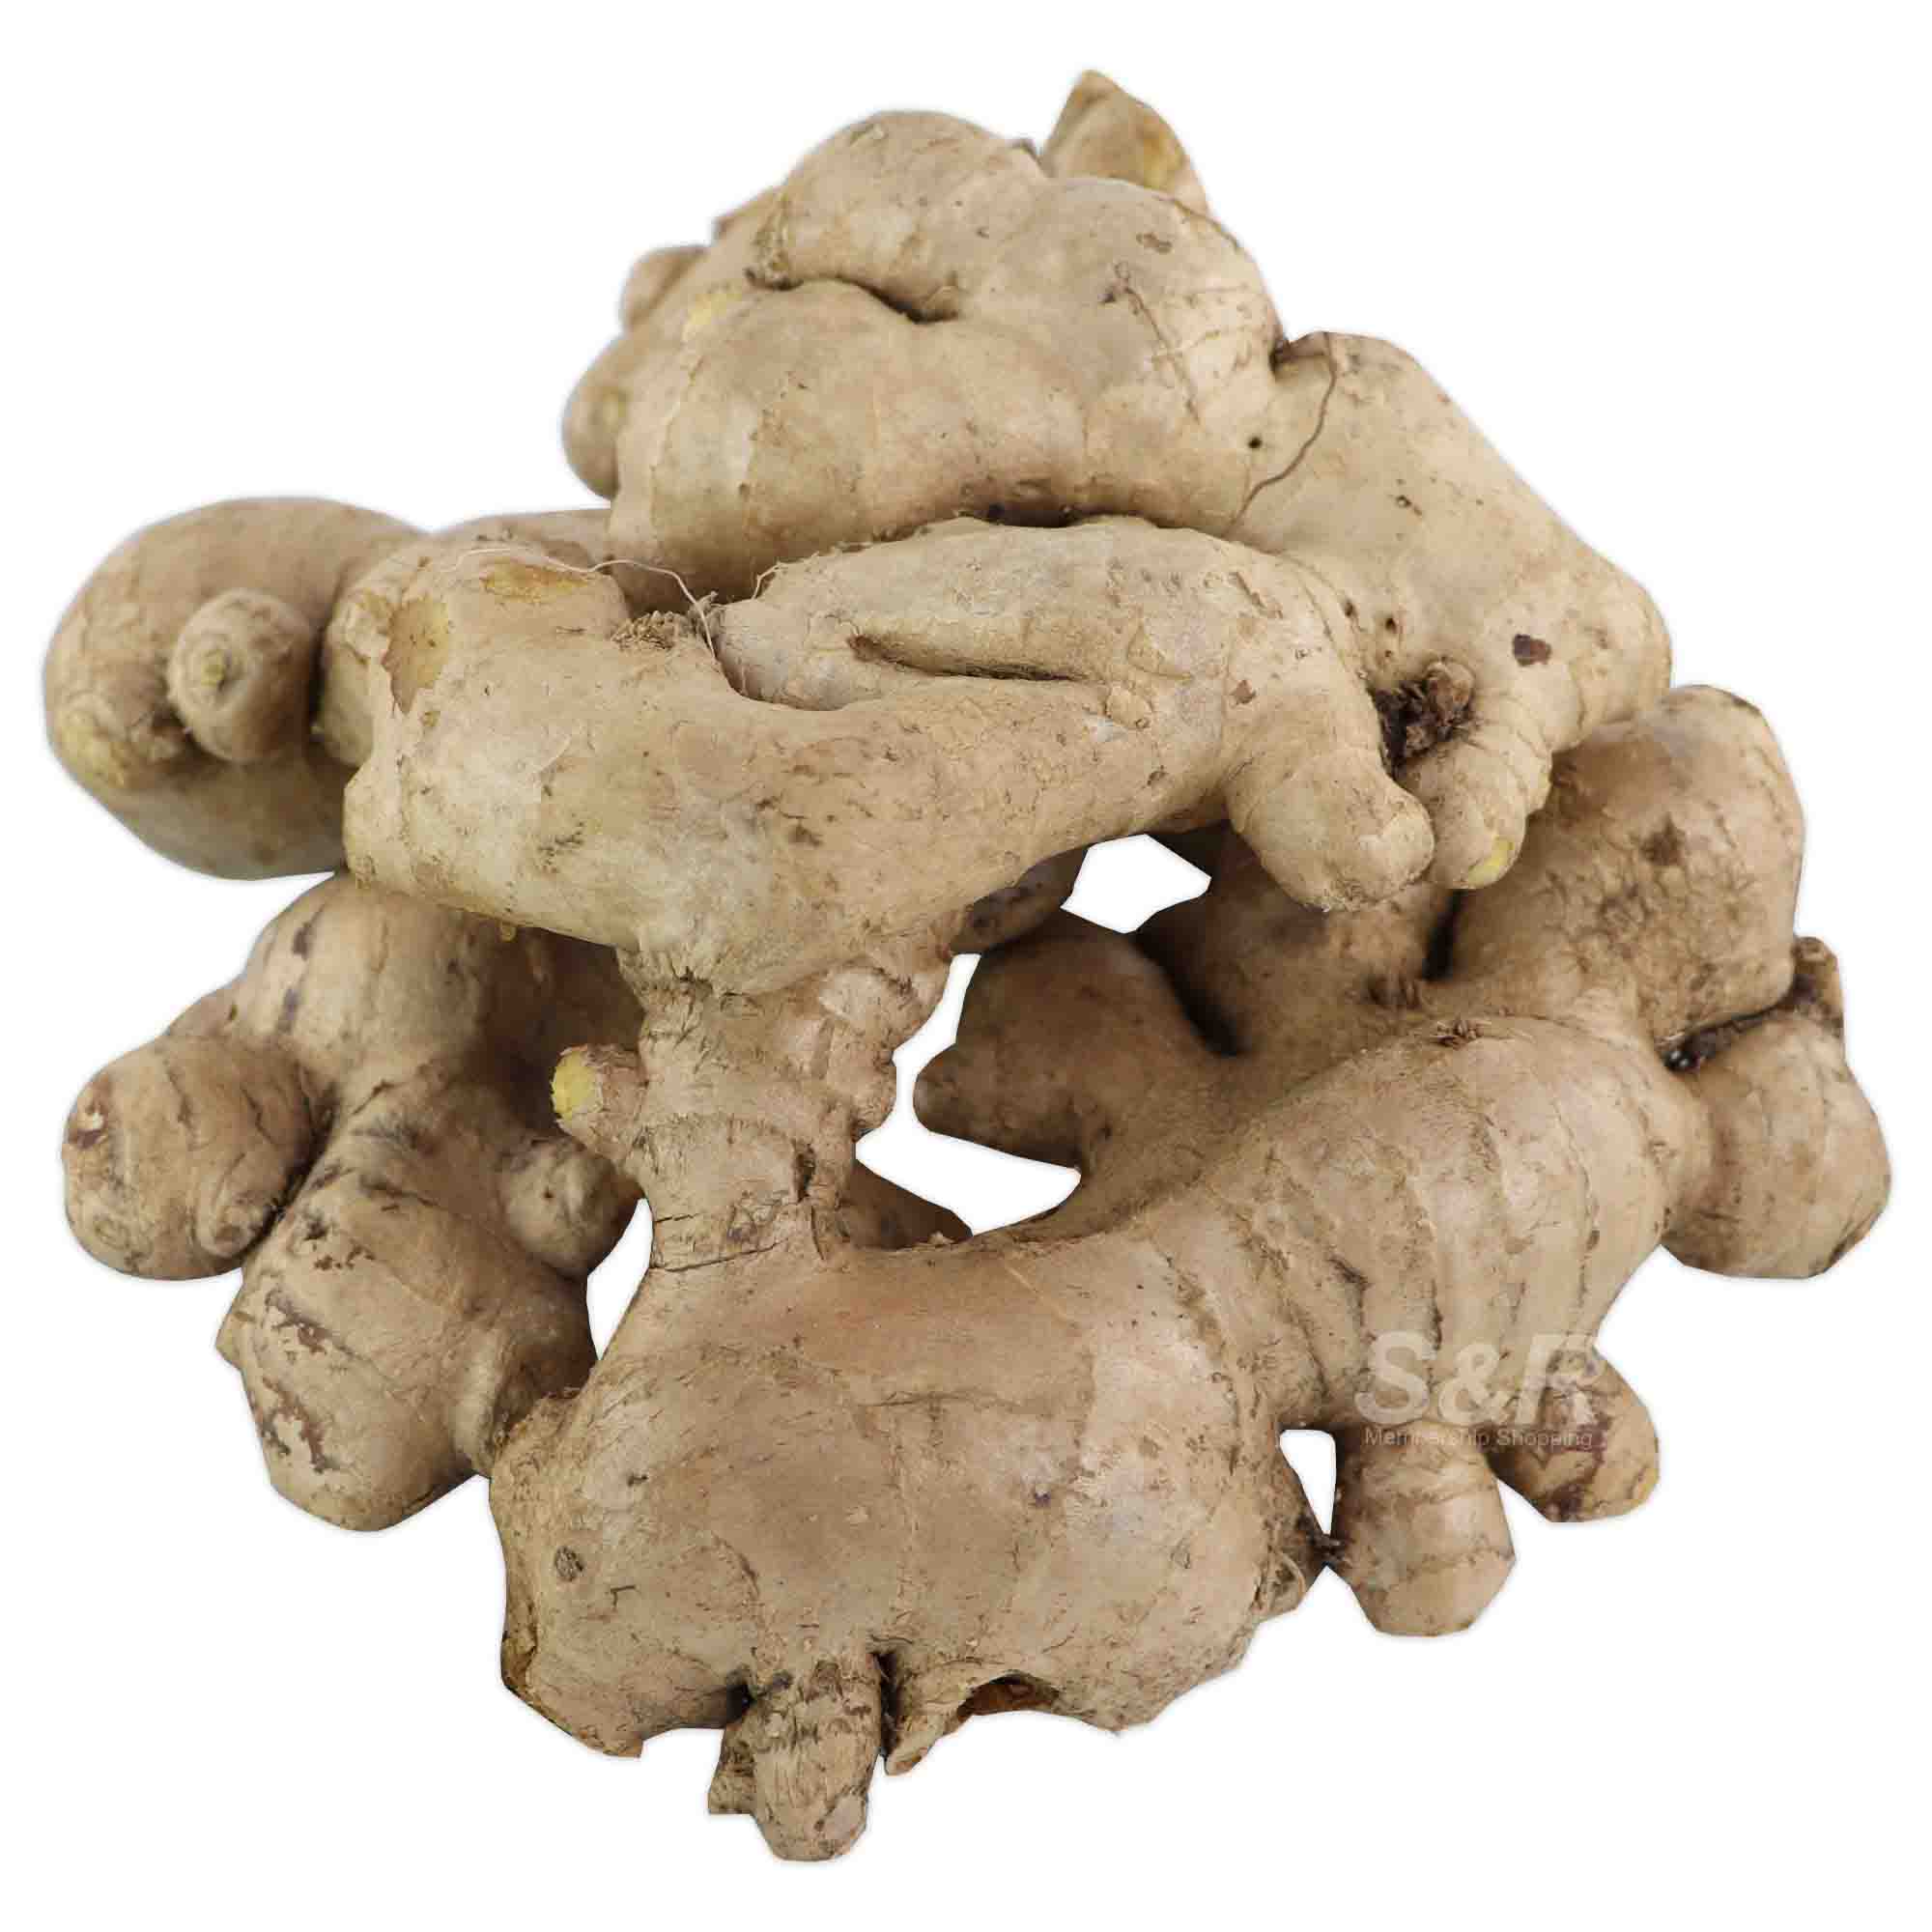 S&R Ginger approx. 1.2kg